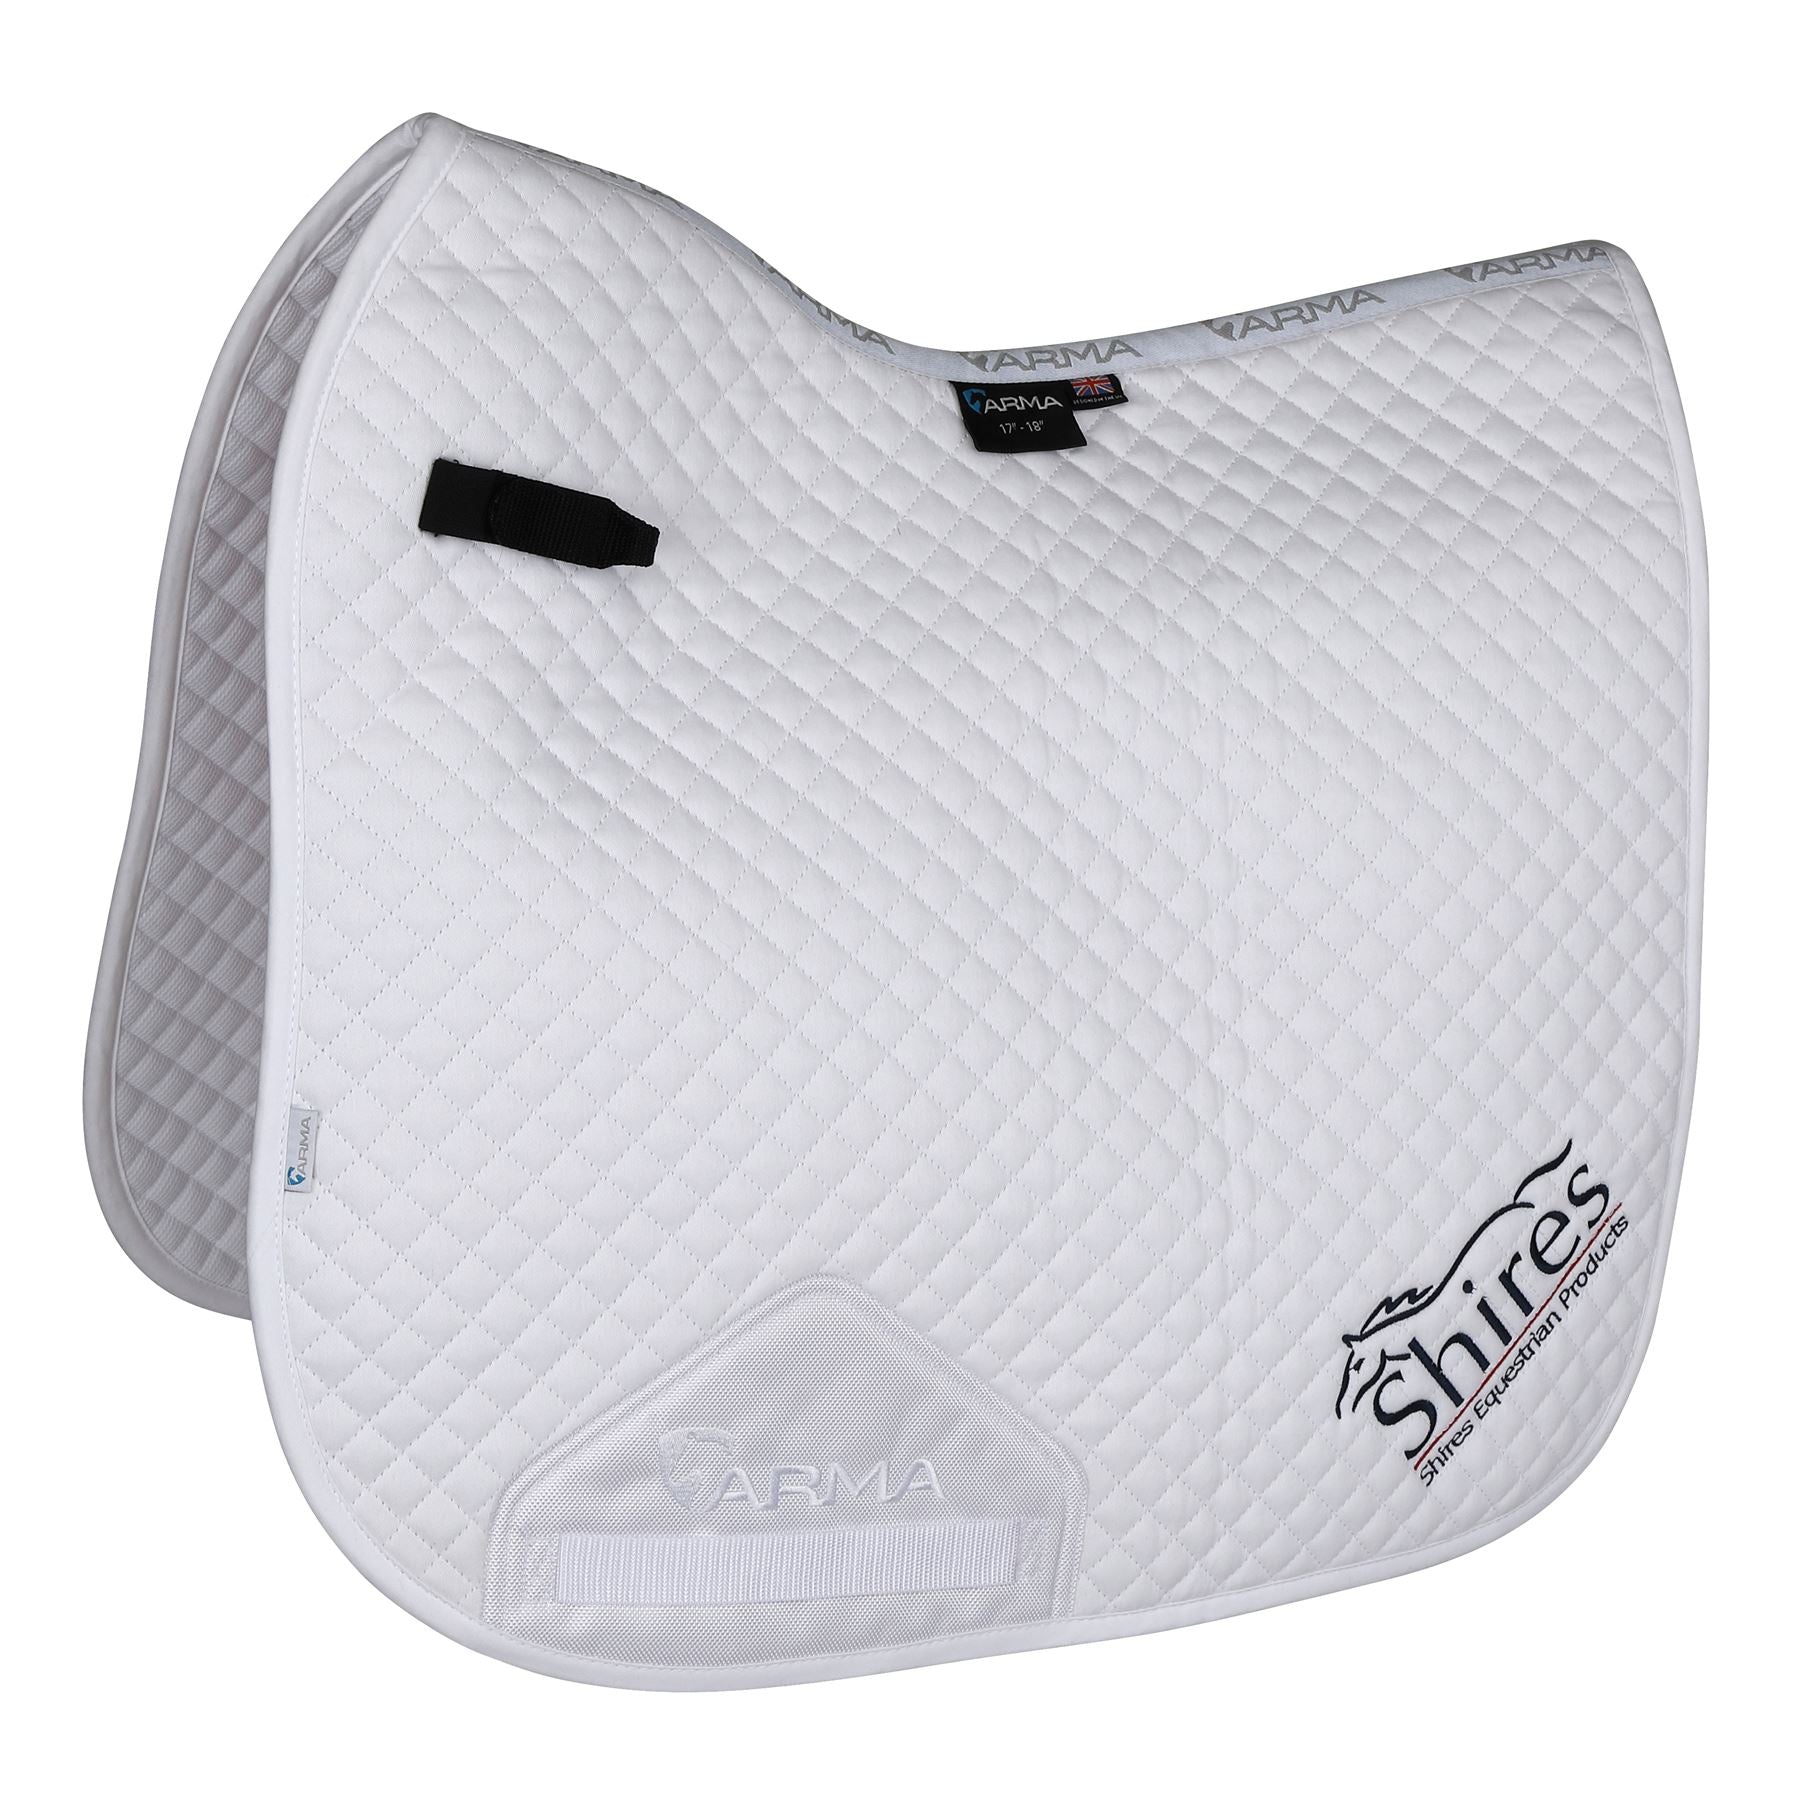 Shires Branded Dressage Saddlecloth - Just Horse Riders